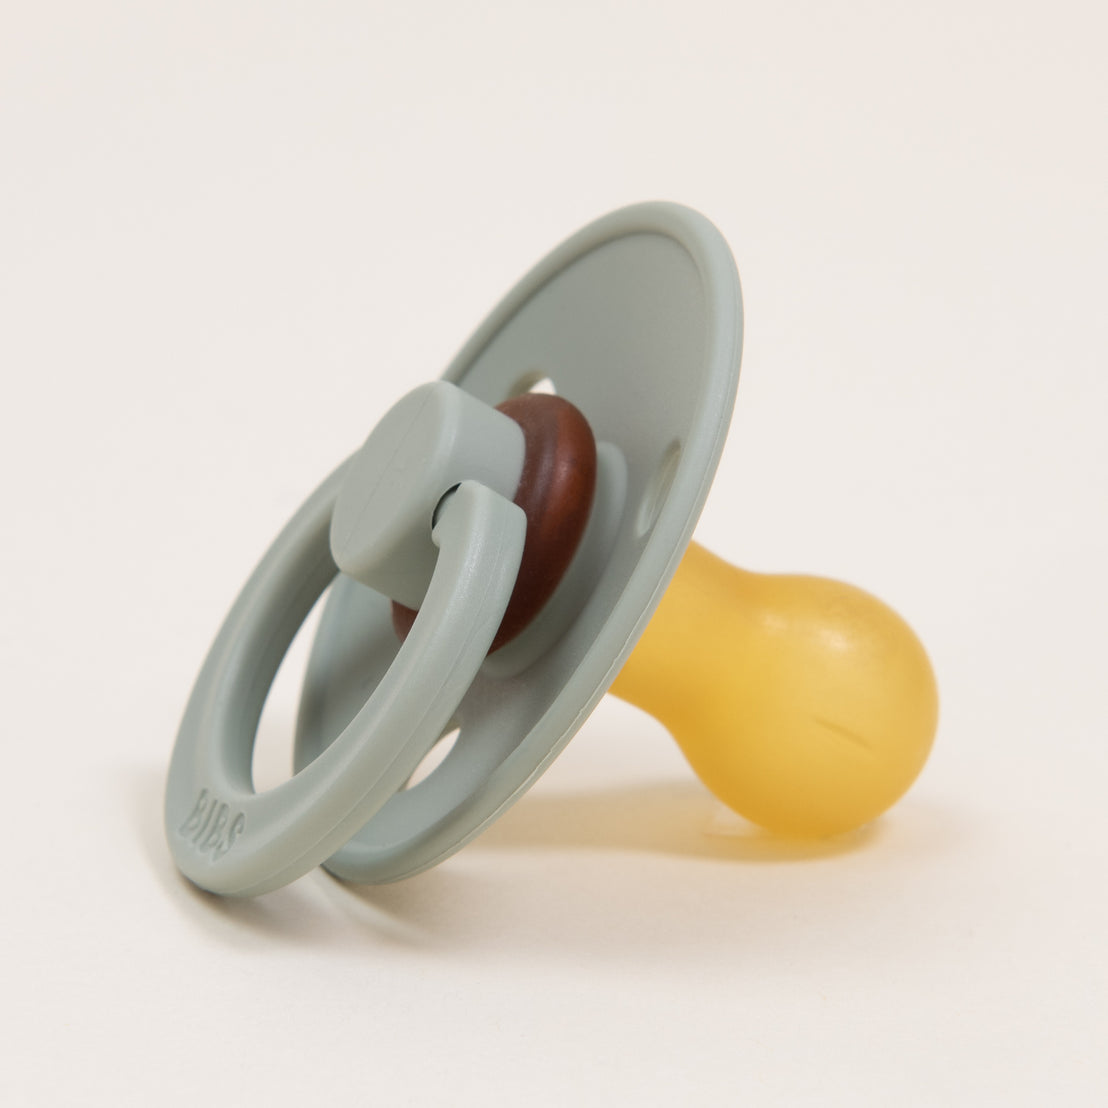 A Bibs pacifier with a pale green handle and yellow nipple, placed on an upscale white background. The pacifier is lying on its side, and the handle is partially loop-shaped.